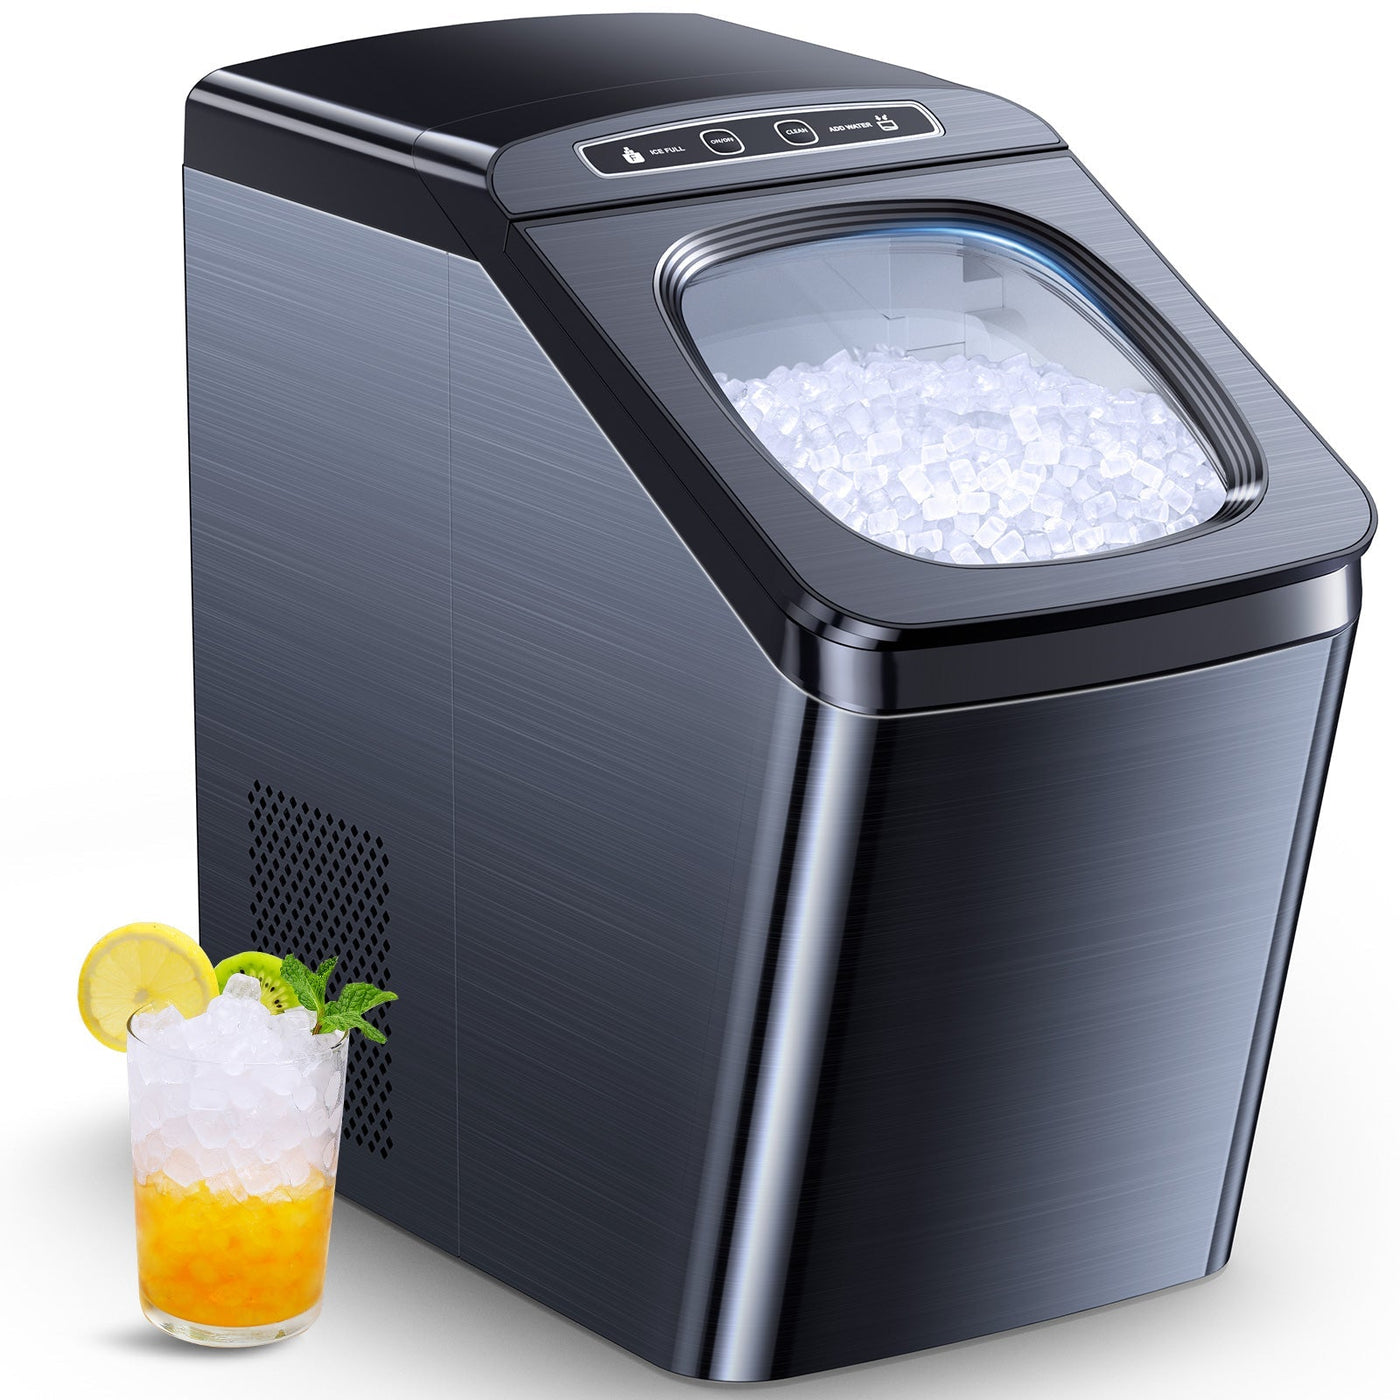 Ice Makers Countertop, Nugget Ice Maker Countertop, 30Lbs Per Day